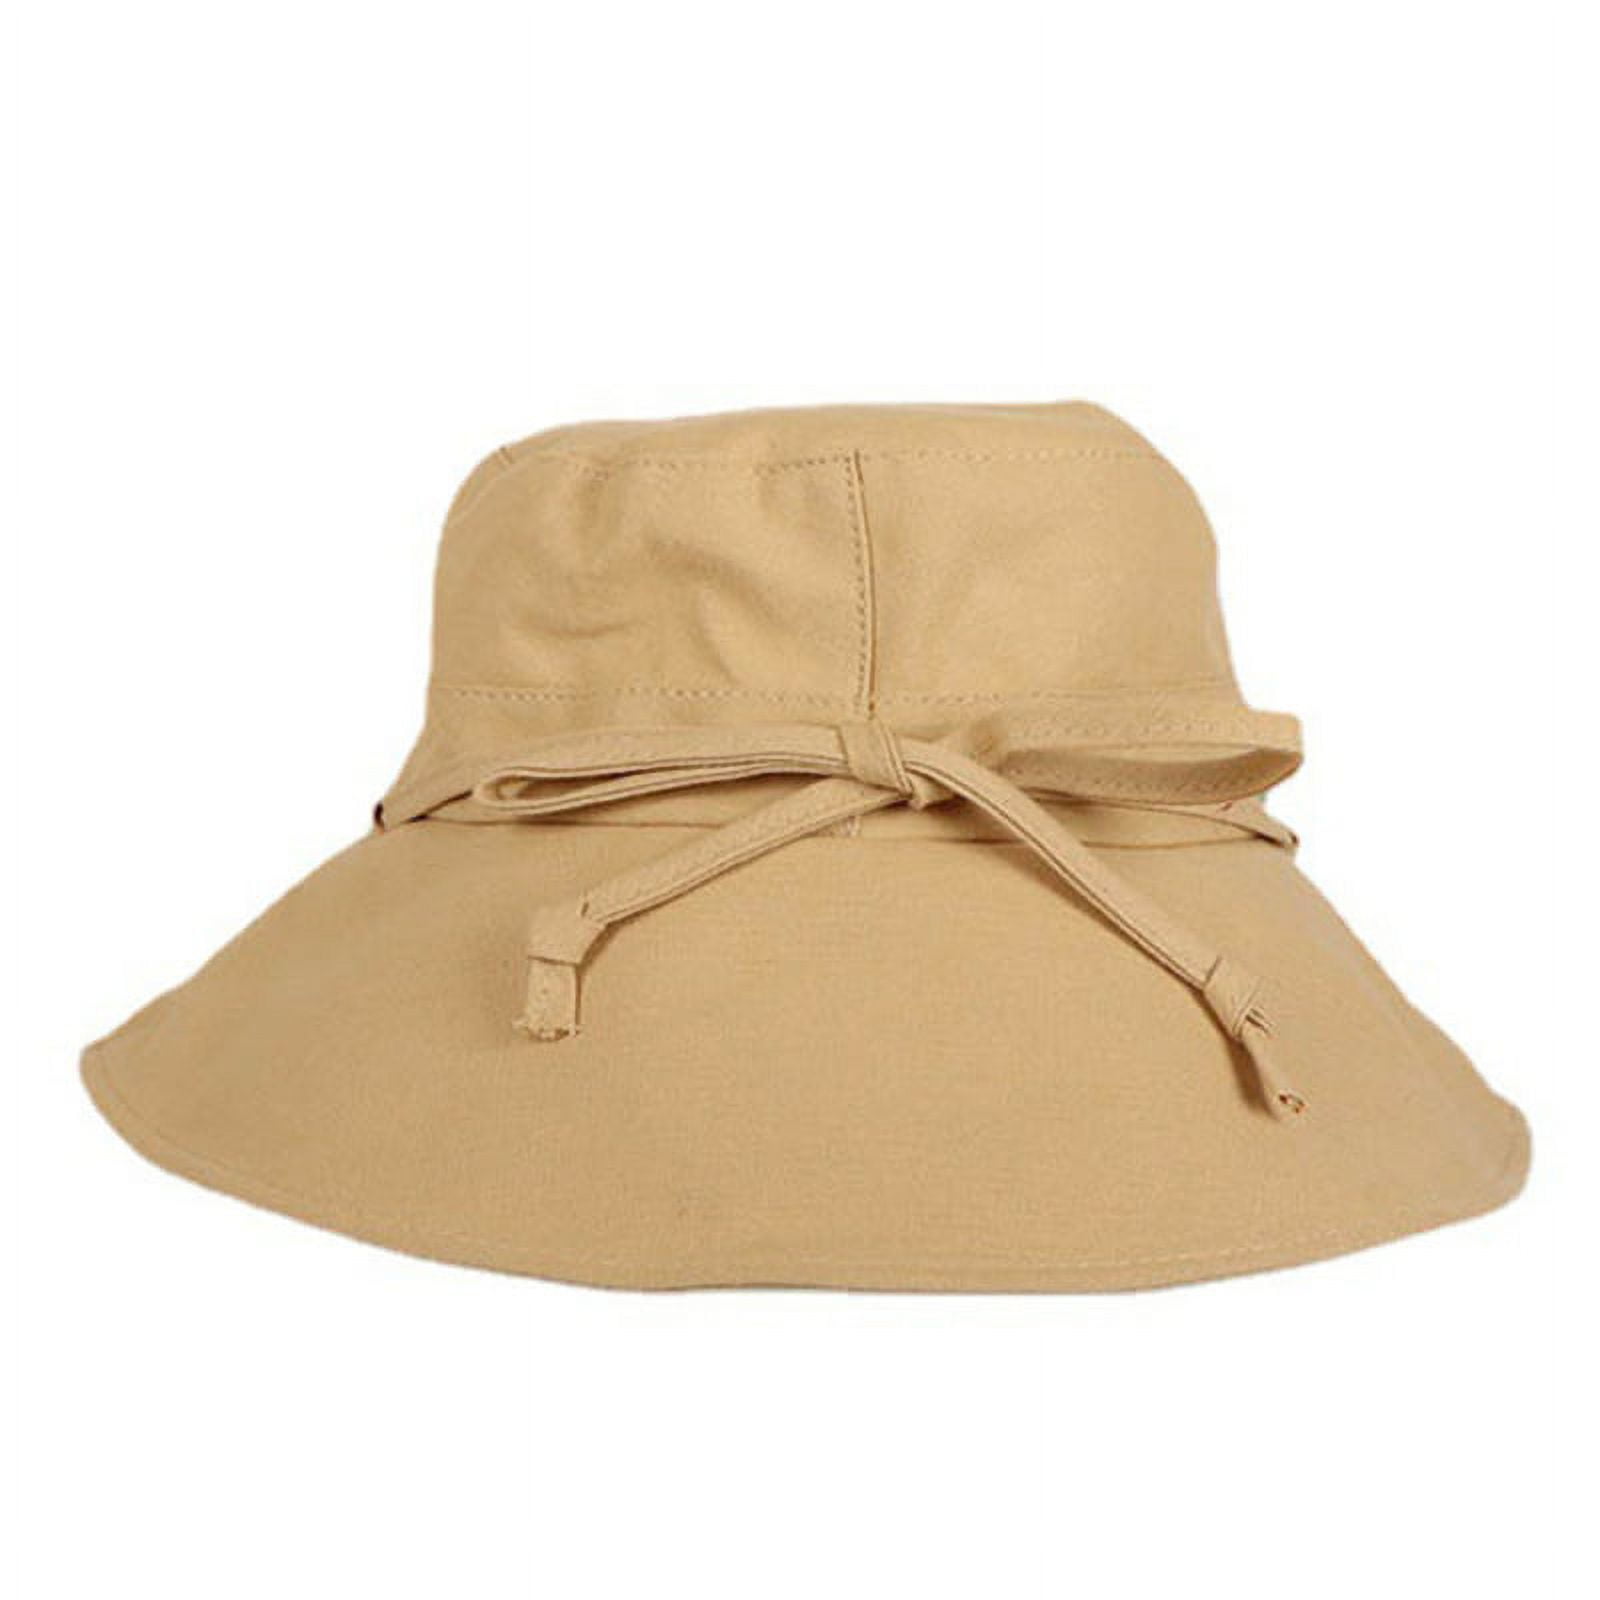 OOKWE Outdoor Fishing Sun Hat Wide Wired Brim Beach Hat Foldable